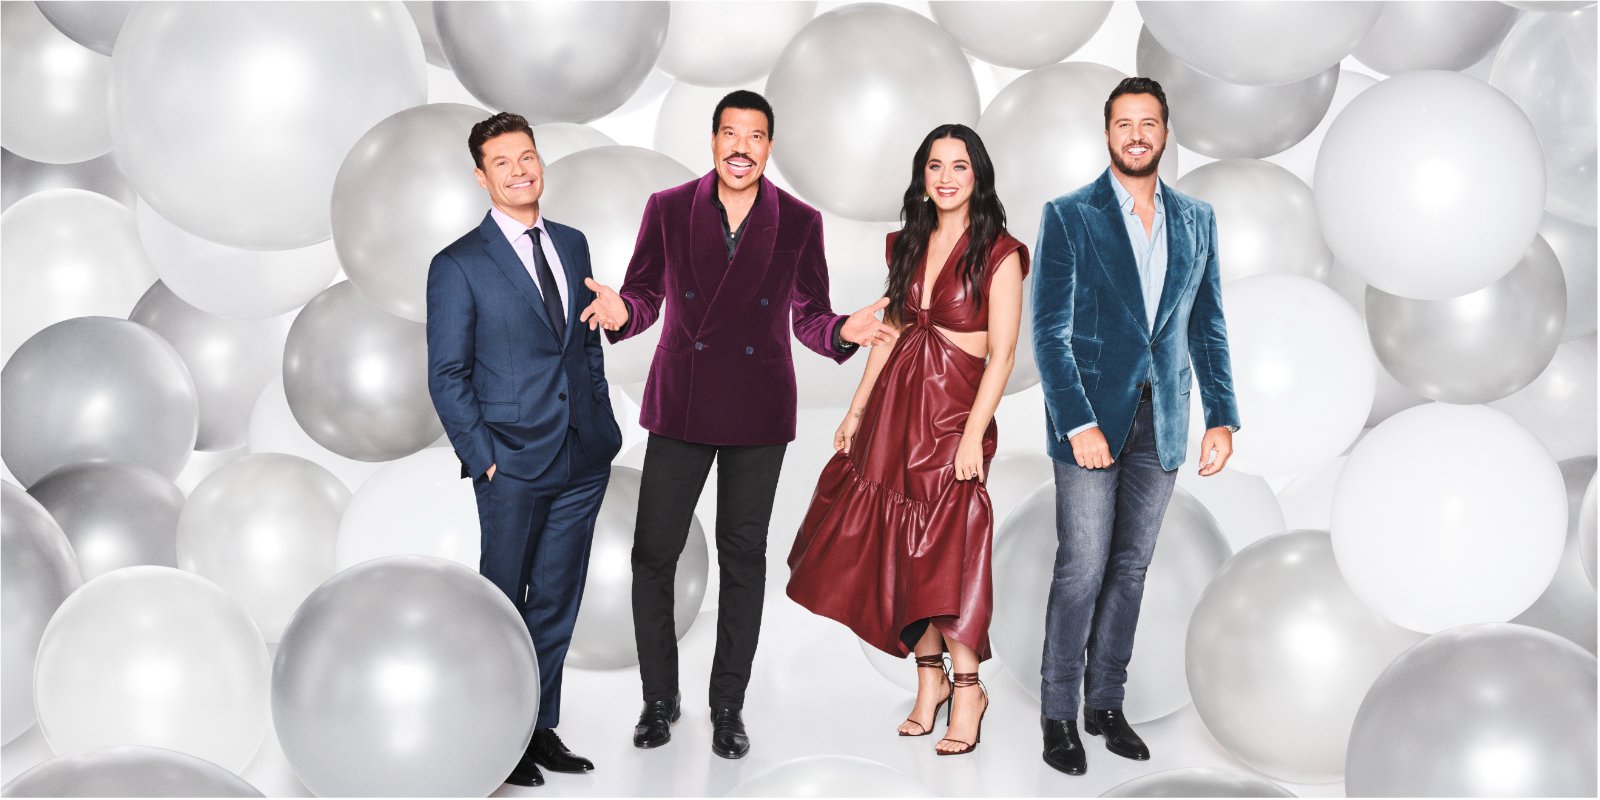 Ryan Seacrest, Lionel Richie, Katy Perry and Luke Bryan pose for a season 21 photoshoot of ABC's 'American Idol.'